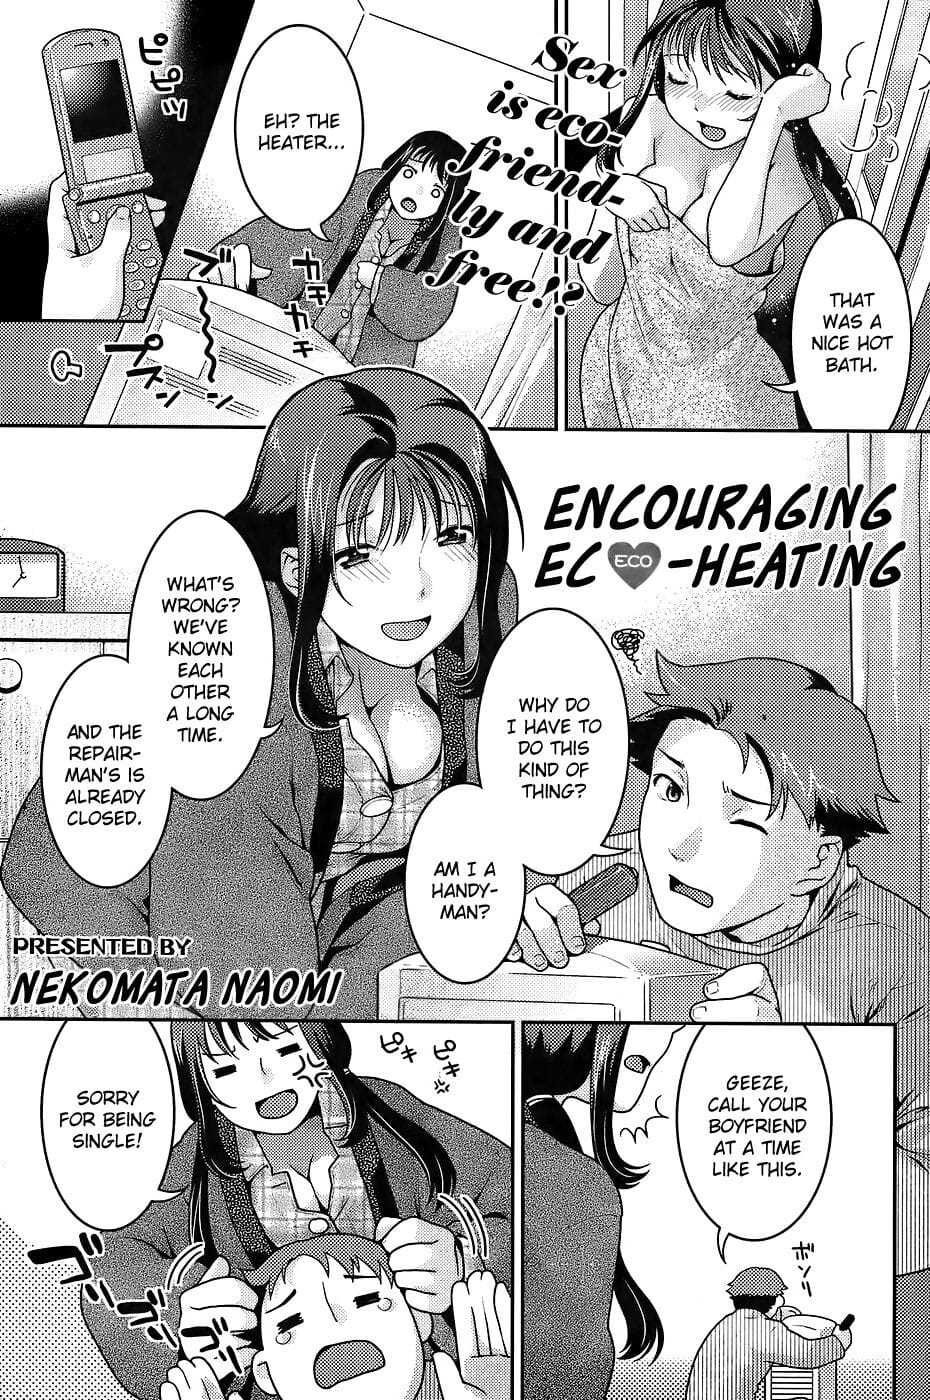 Encouraging Eco-heating page 1